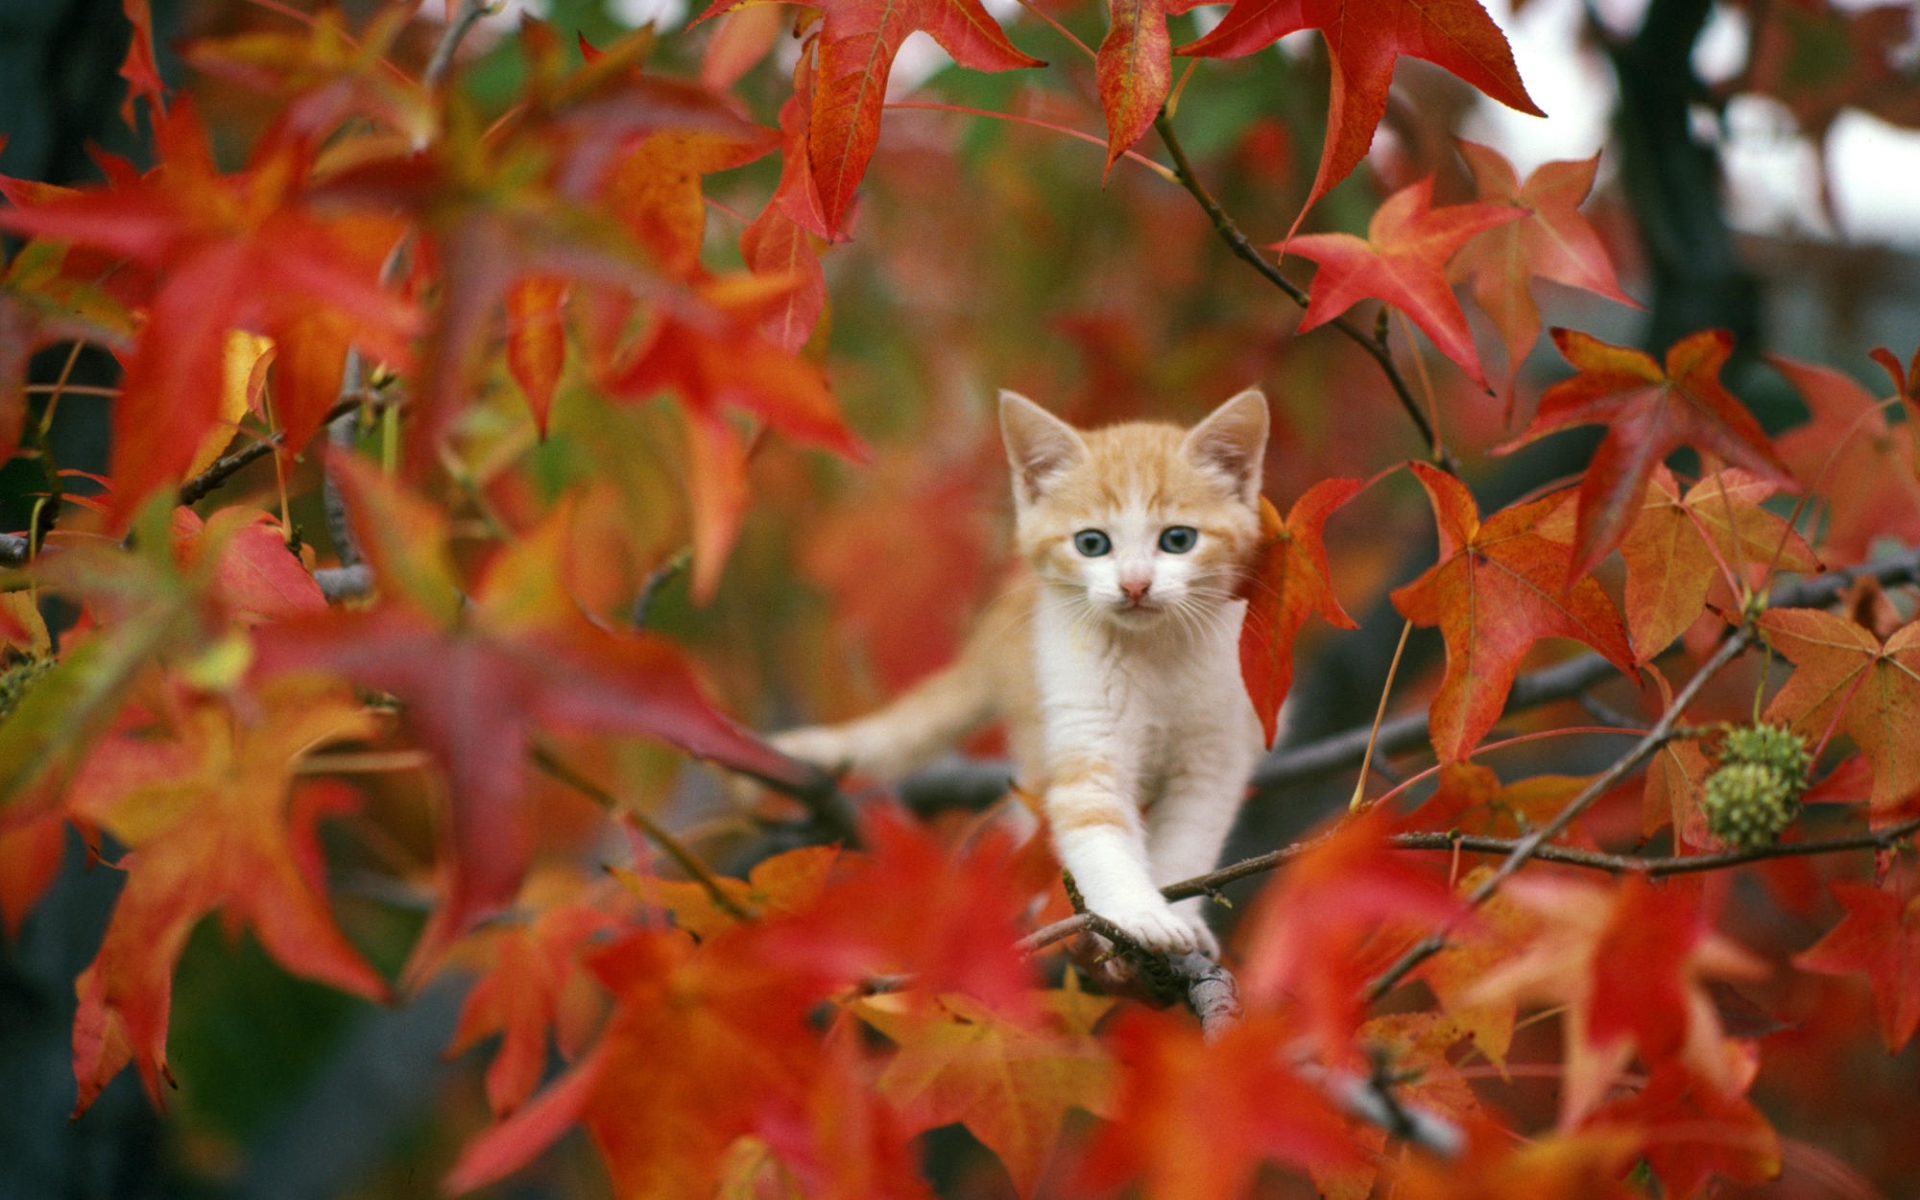 Animals cats kittens fur face whiskers trees autumn fall seasons